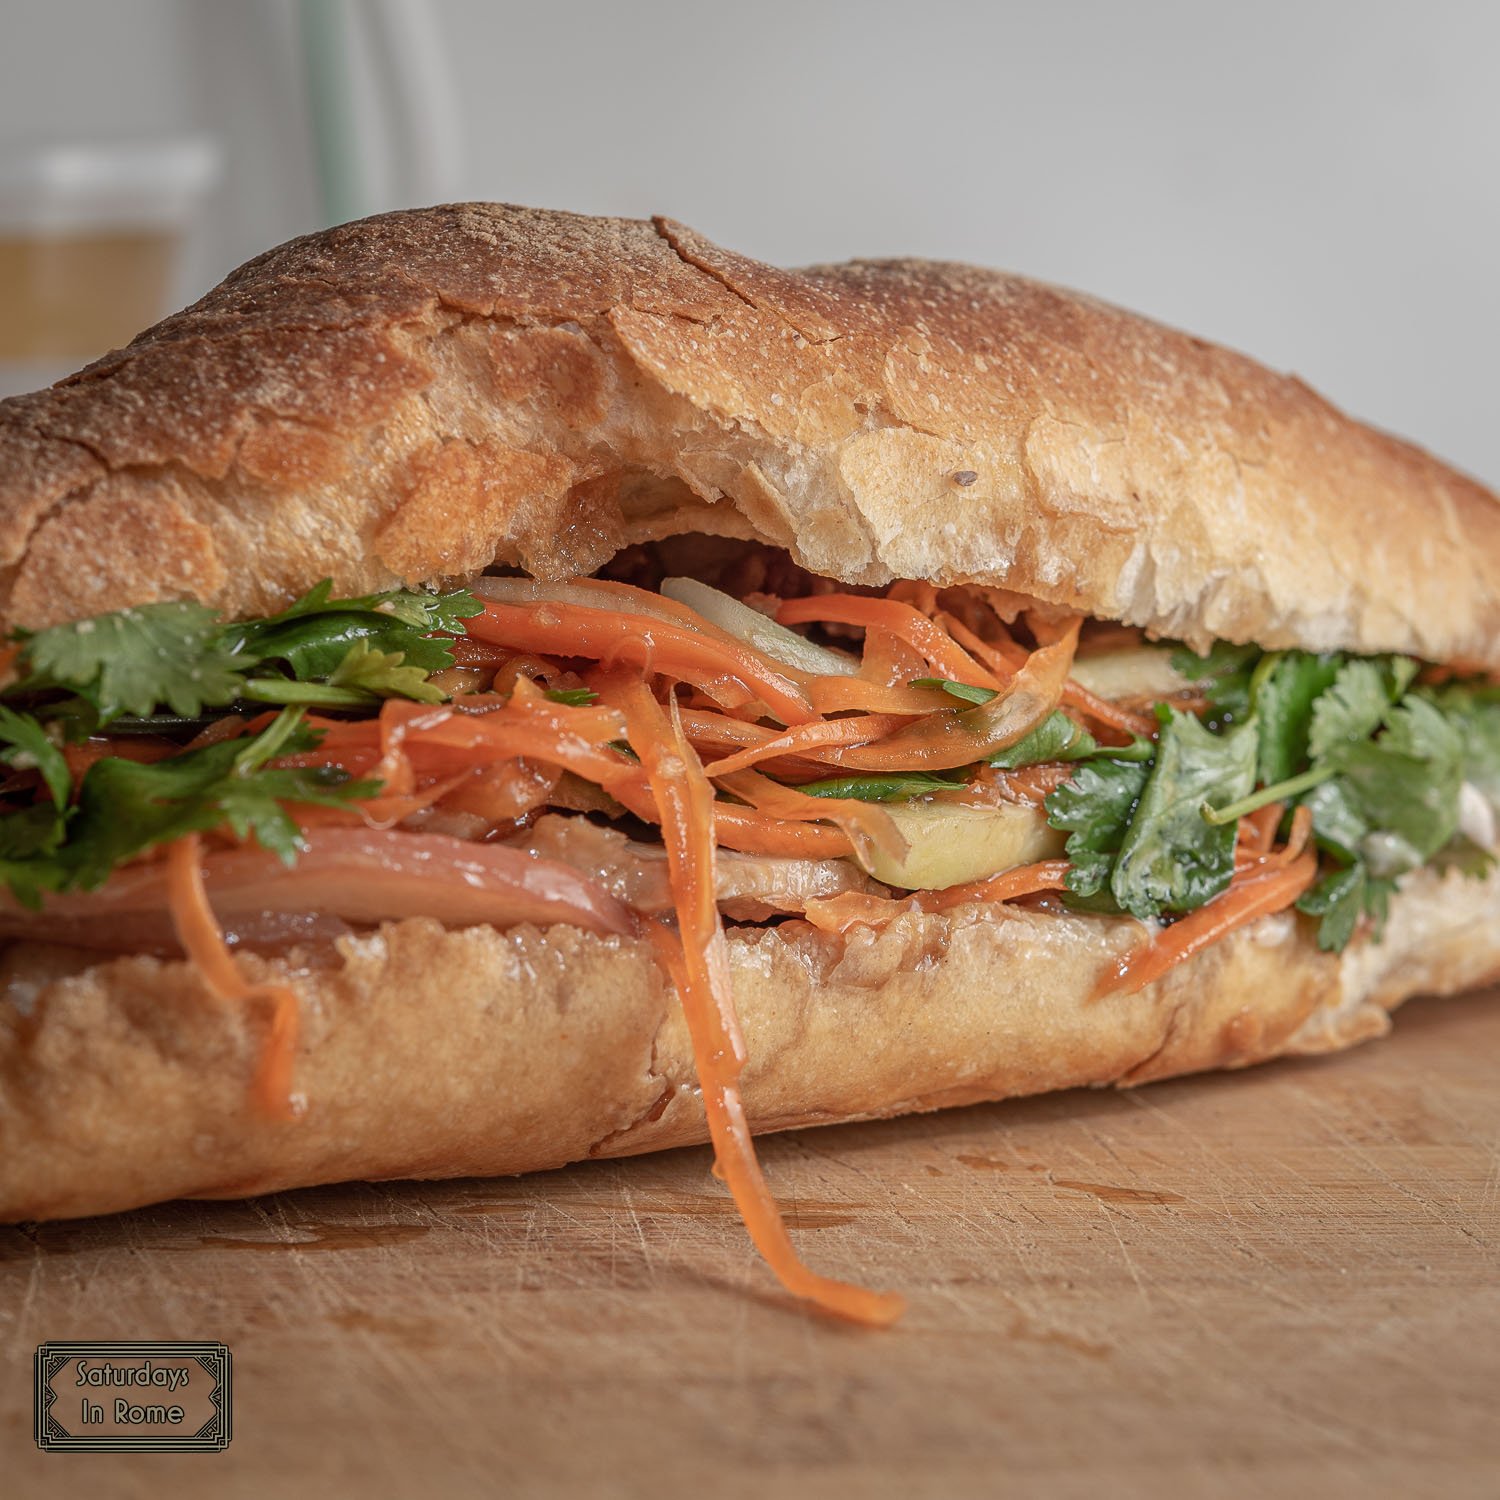 best foreign foods to try - Banh Mi